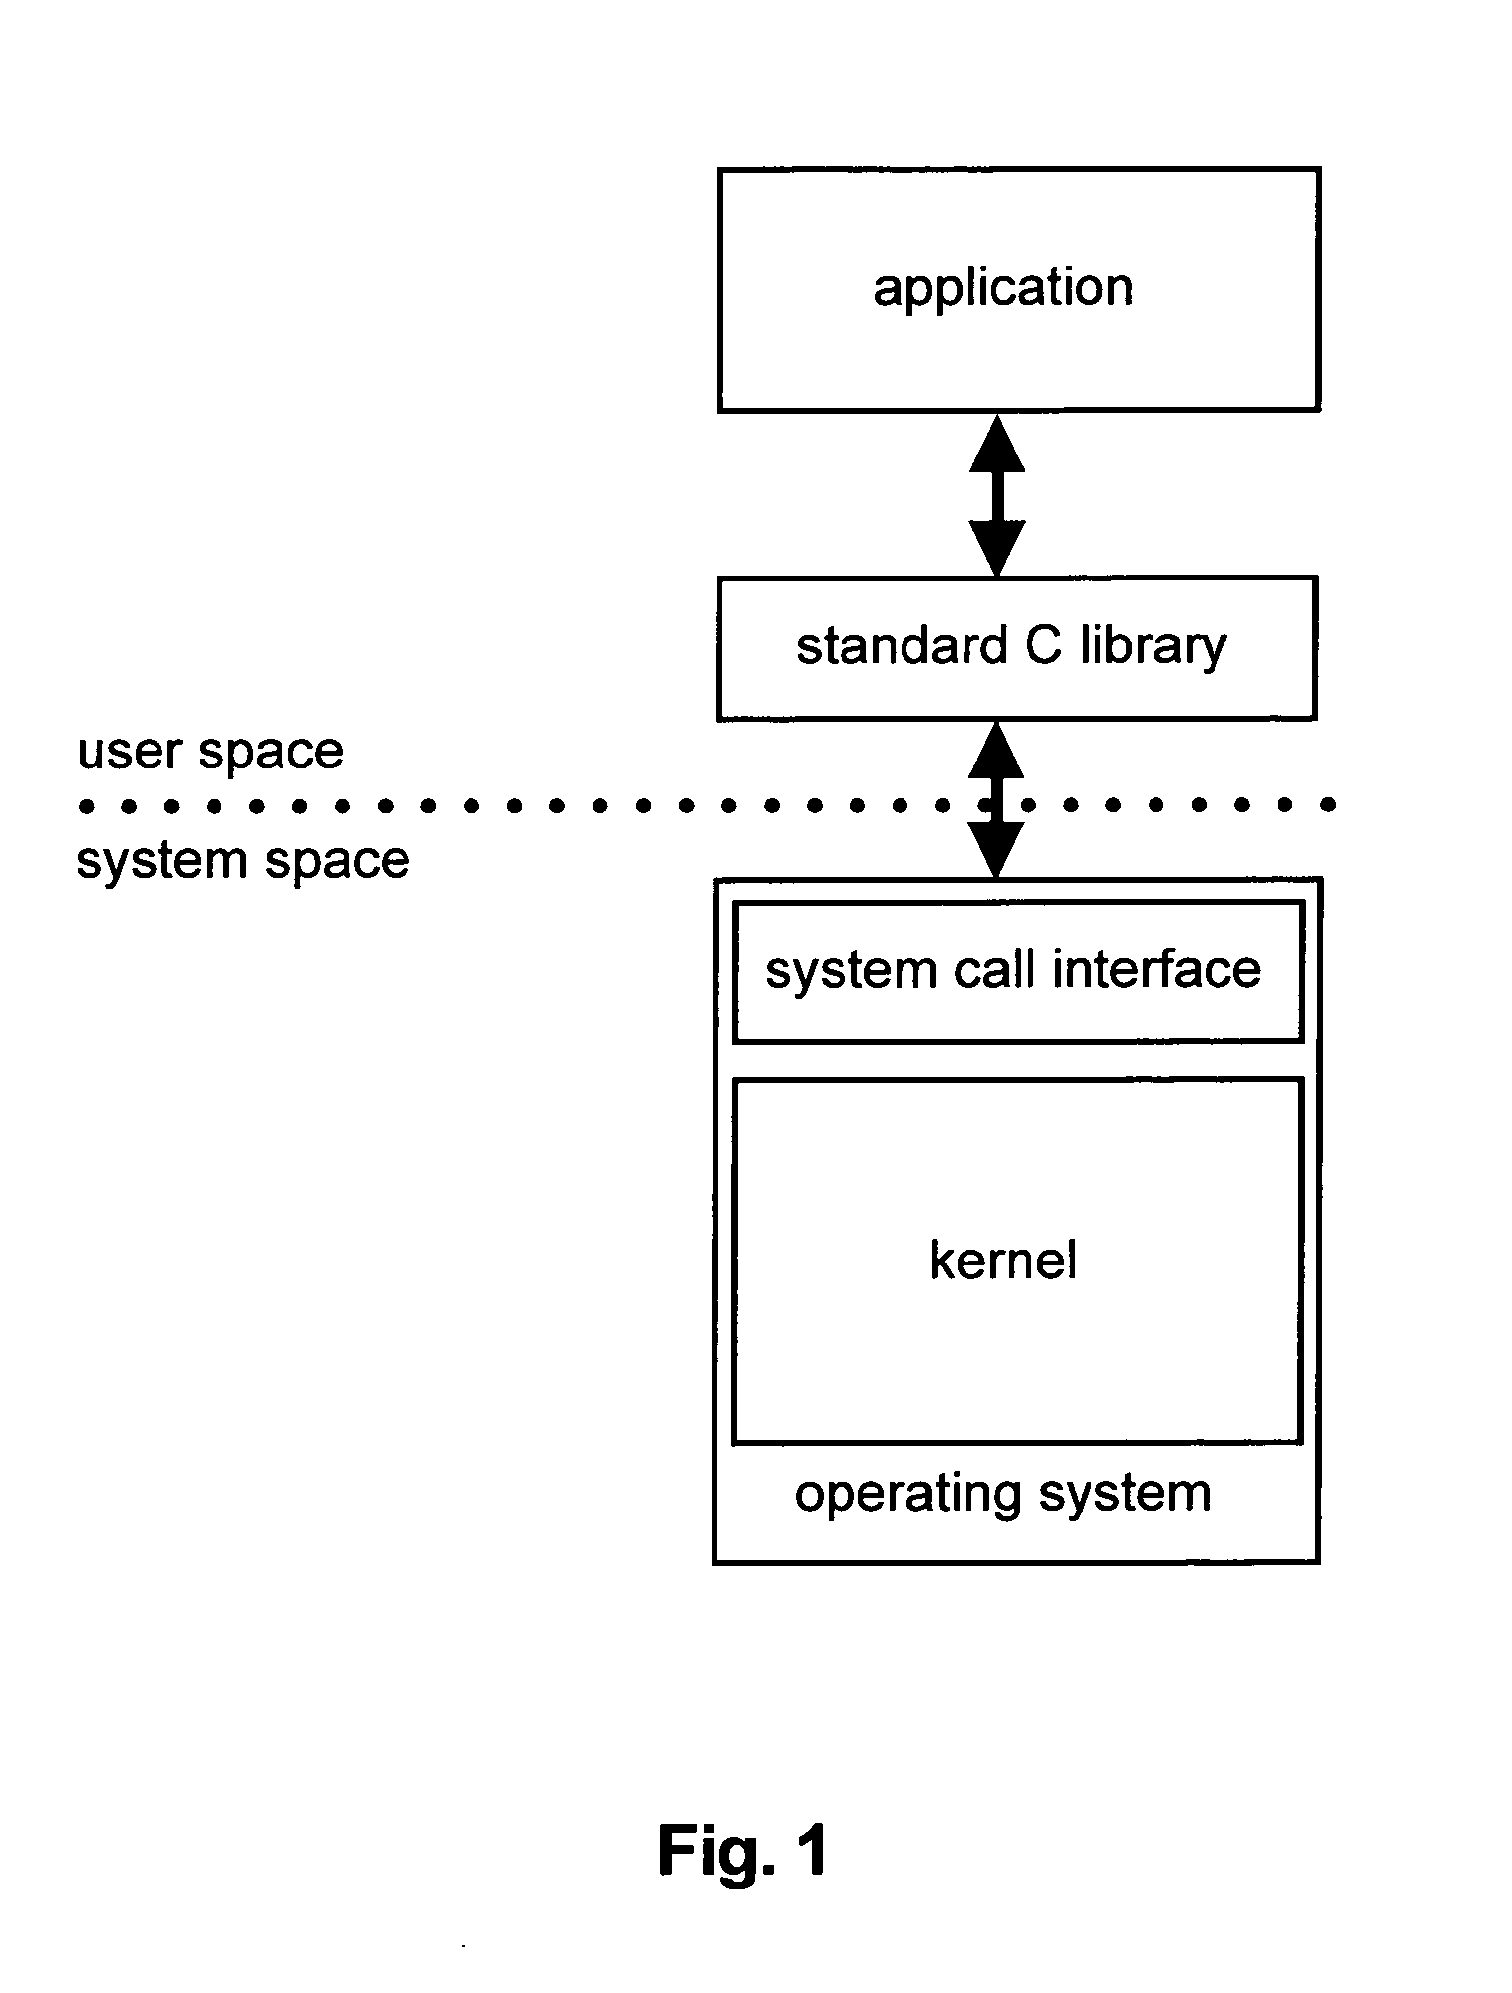 Method for a secured backup and restore of configuration data of an end-user device, and device using the method